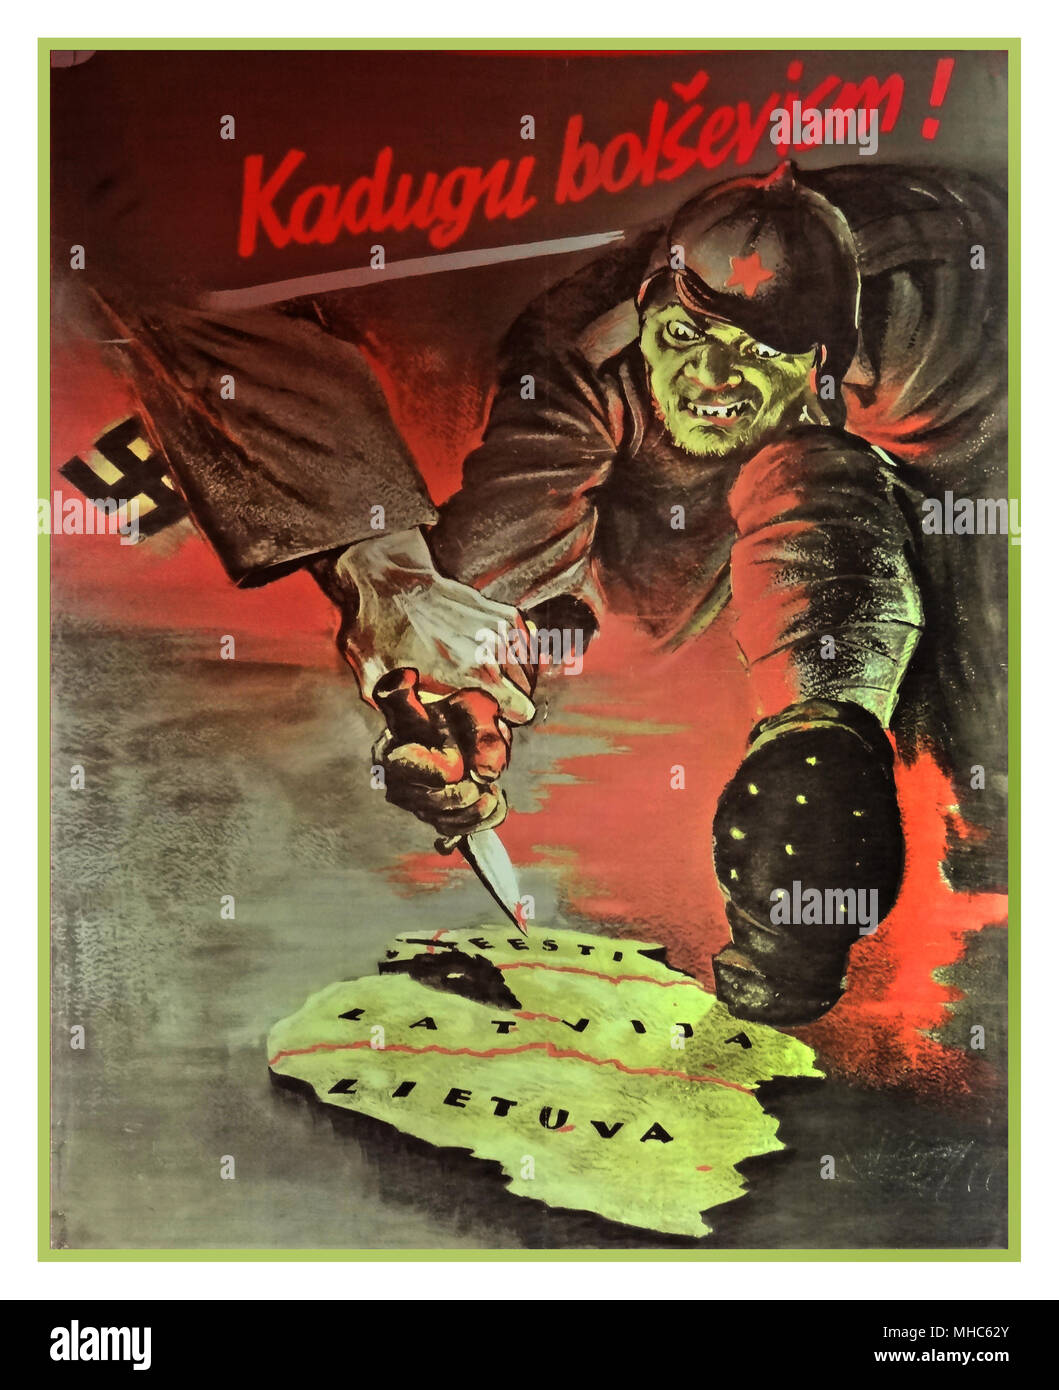 Propaganda Poster During World War II 'bolshevism, be gone!' Nazi hand stopping knife penetrating Eastern states including Latvia etc by an Eastern bloc soldier portrayed as a demonic beast and part of the Bolshevik movement. Anti Communist Anti Bolshevism propaganda poster by Nazi Germany 1940's Stock Photo